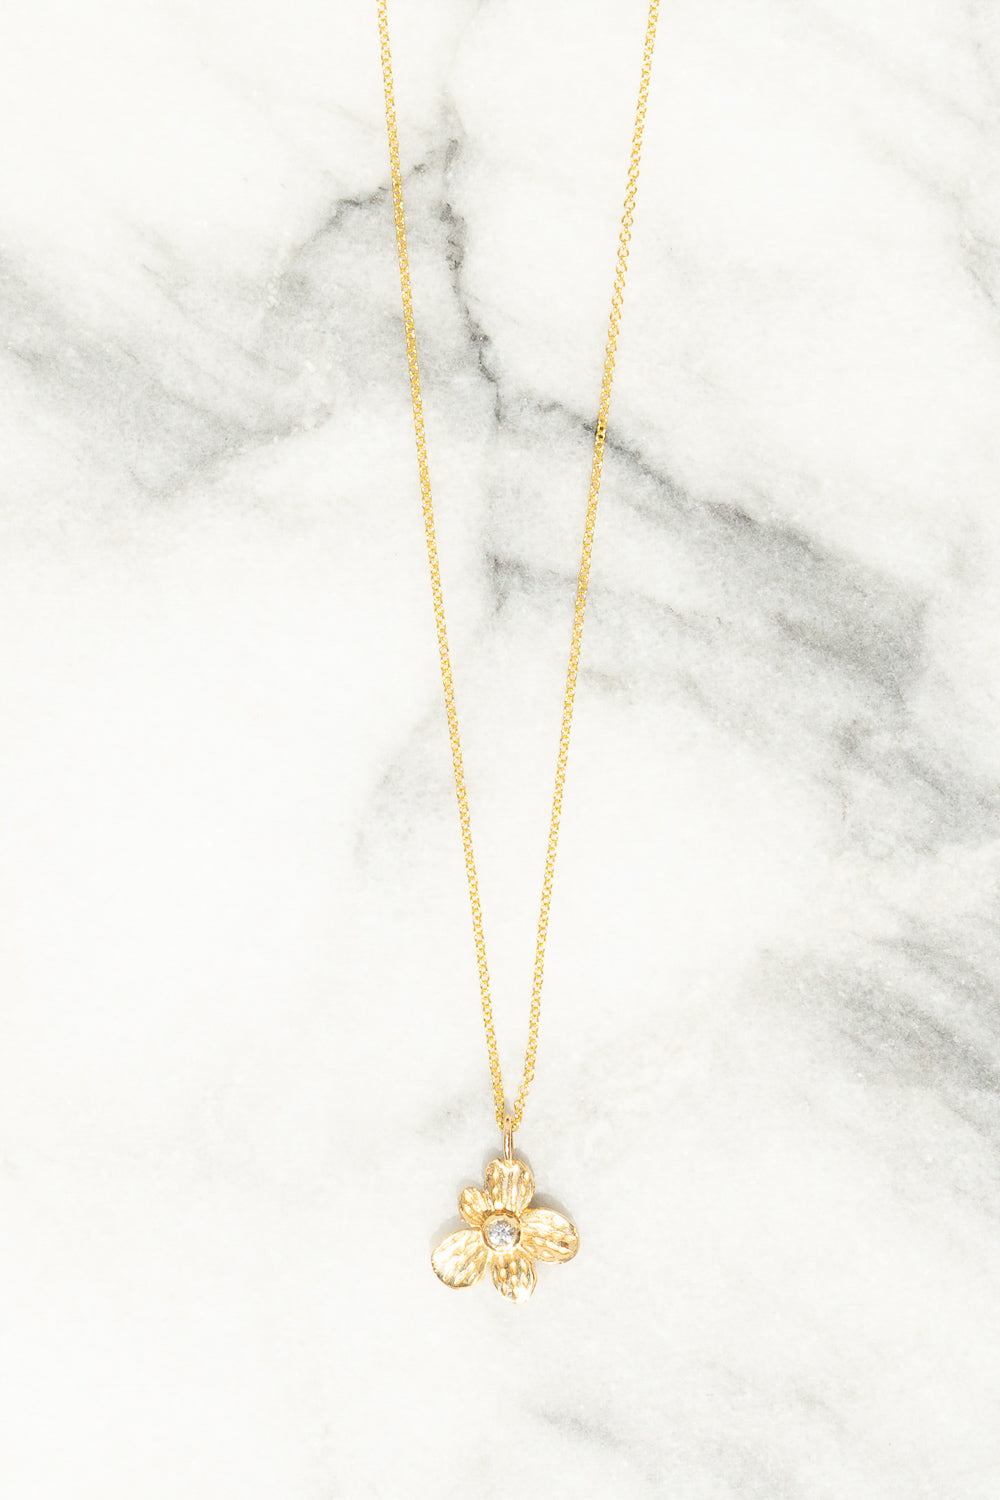 gold flower charm necklace with white sapphire center